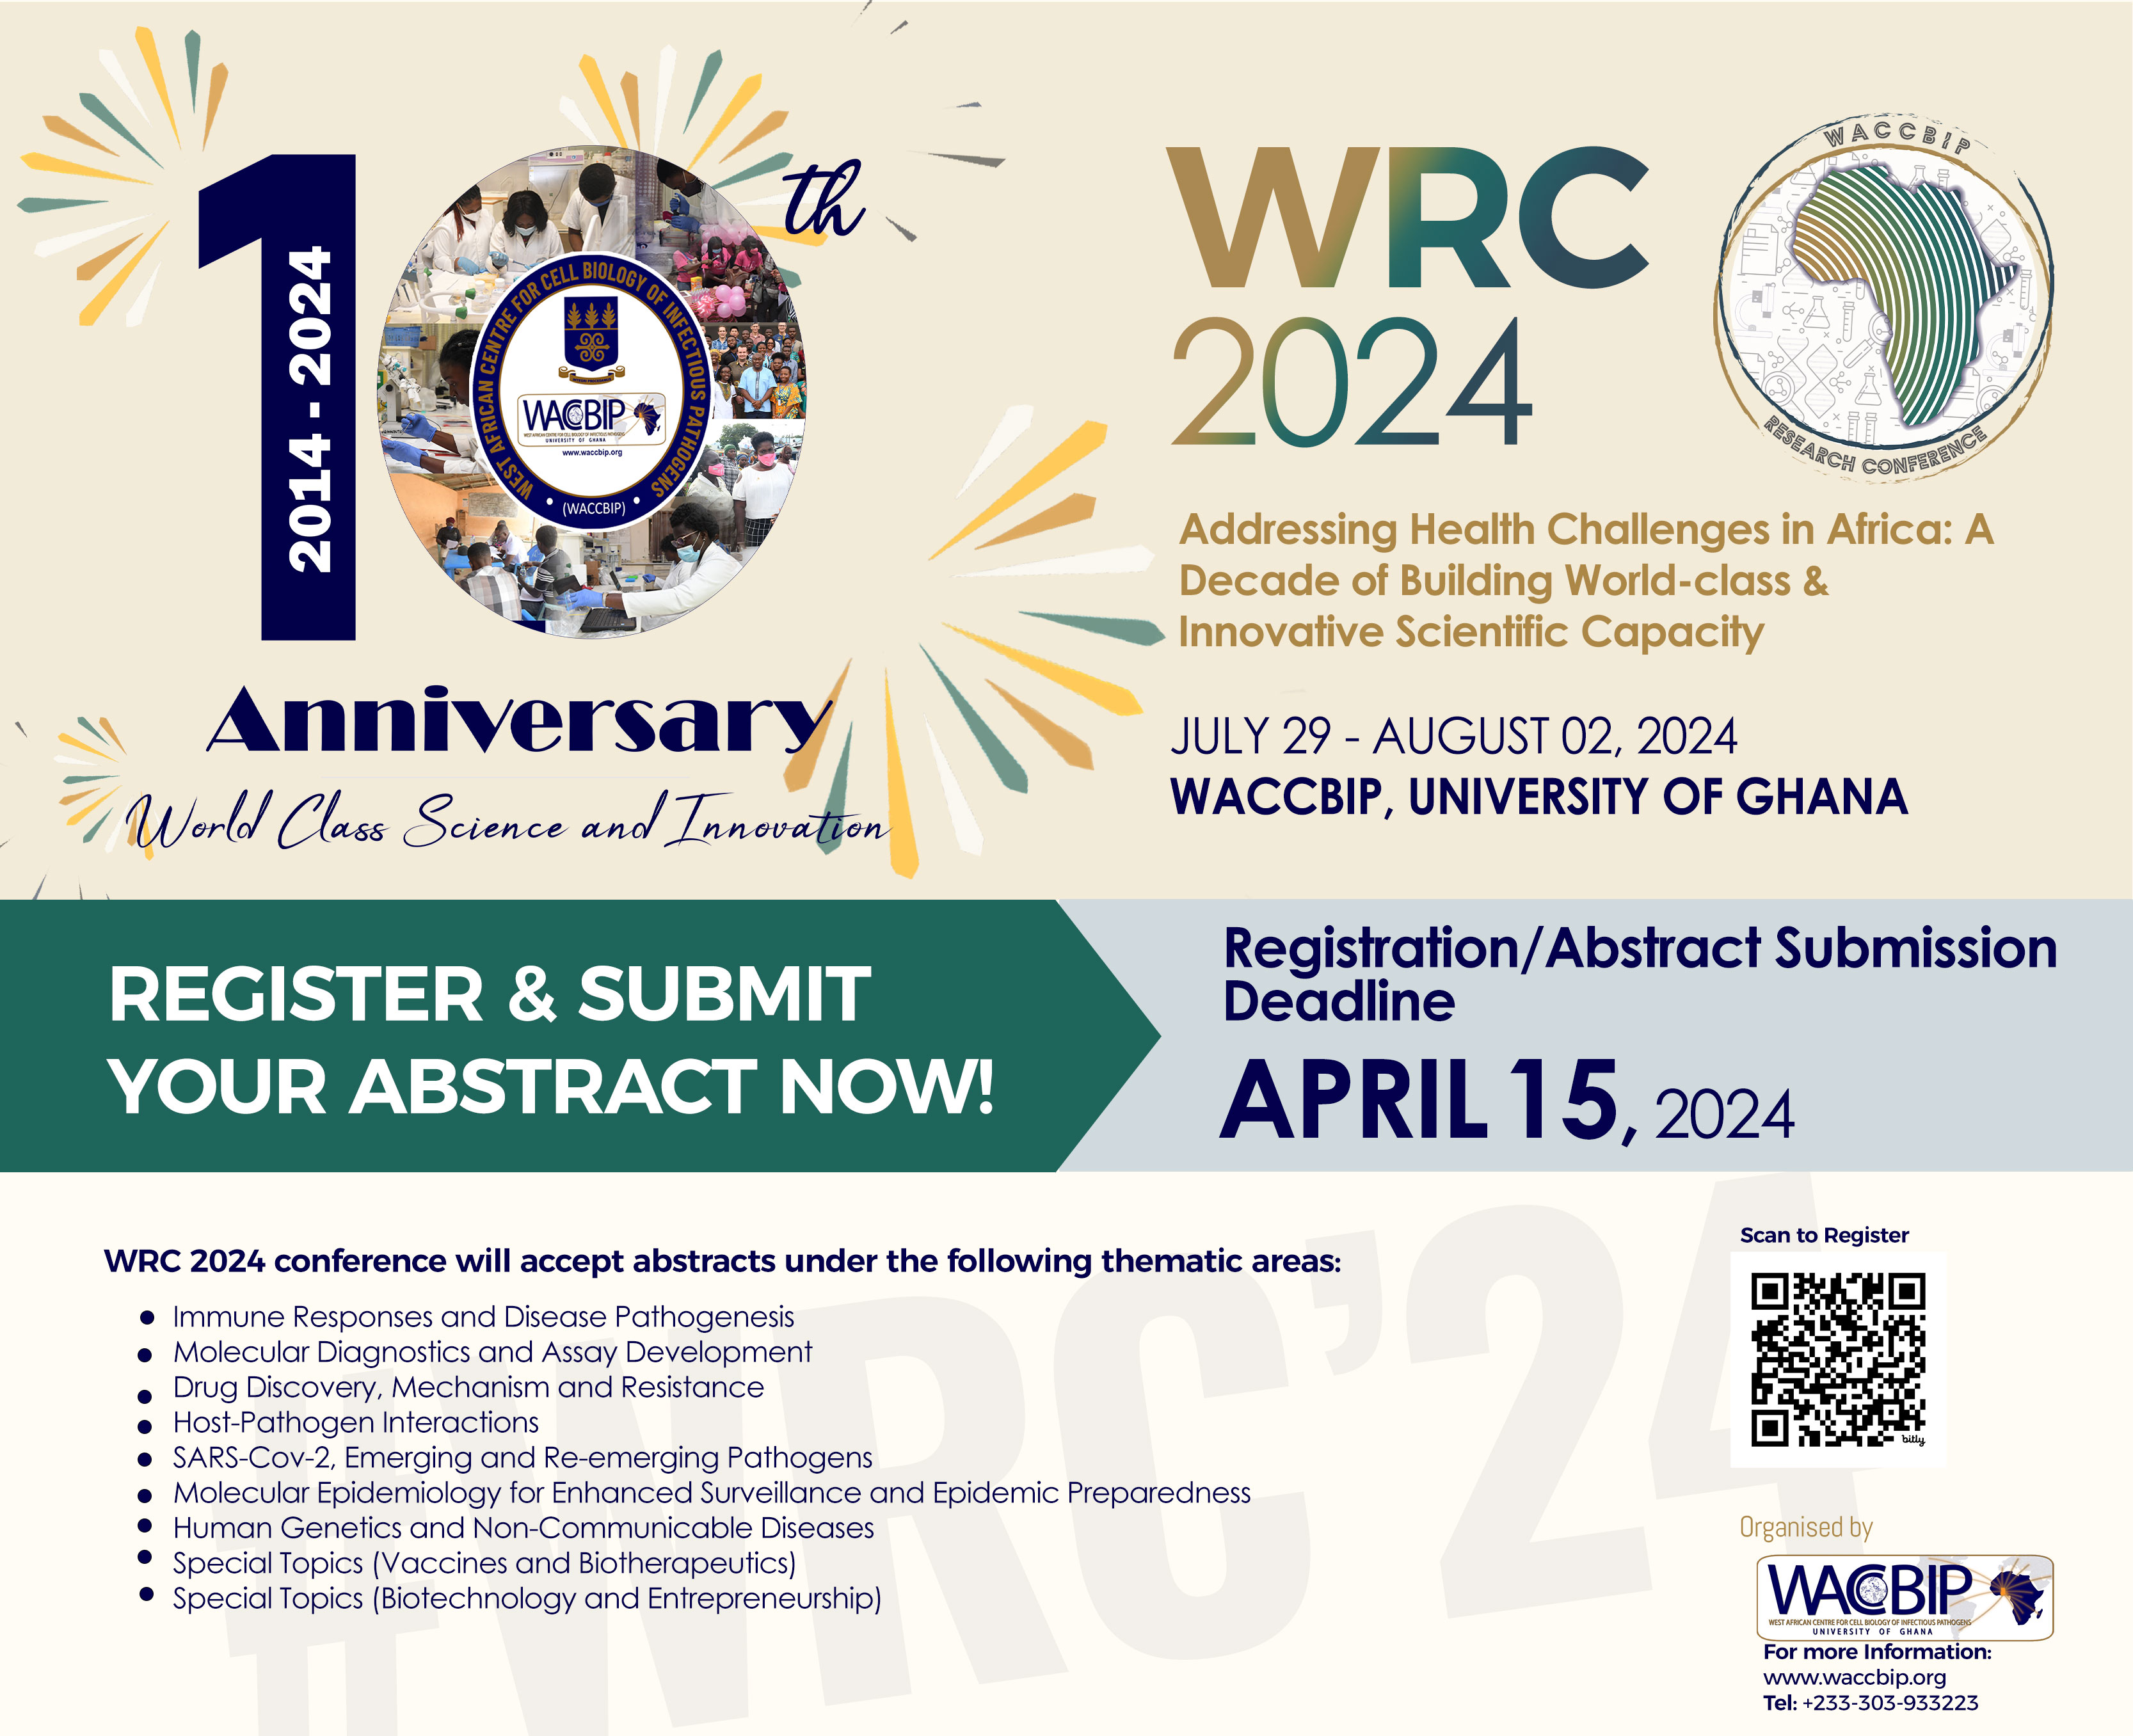 WACCBIP Tenth Anniversary and 8th Research Conference: Registration and Call for Abstracts